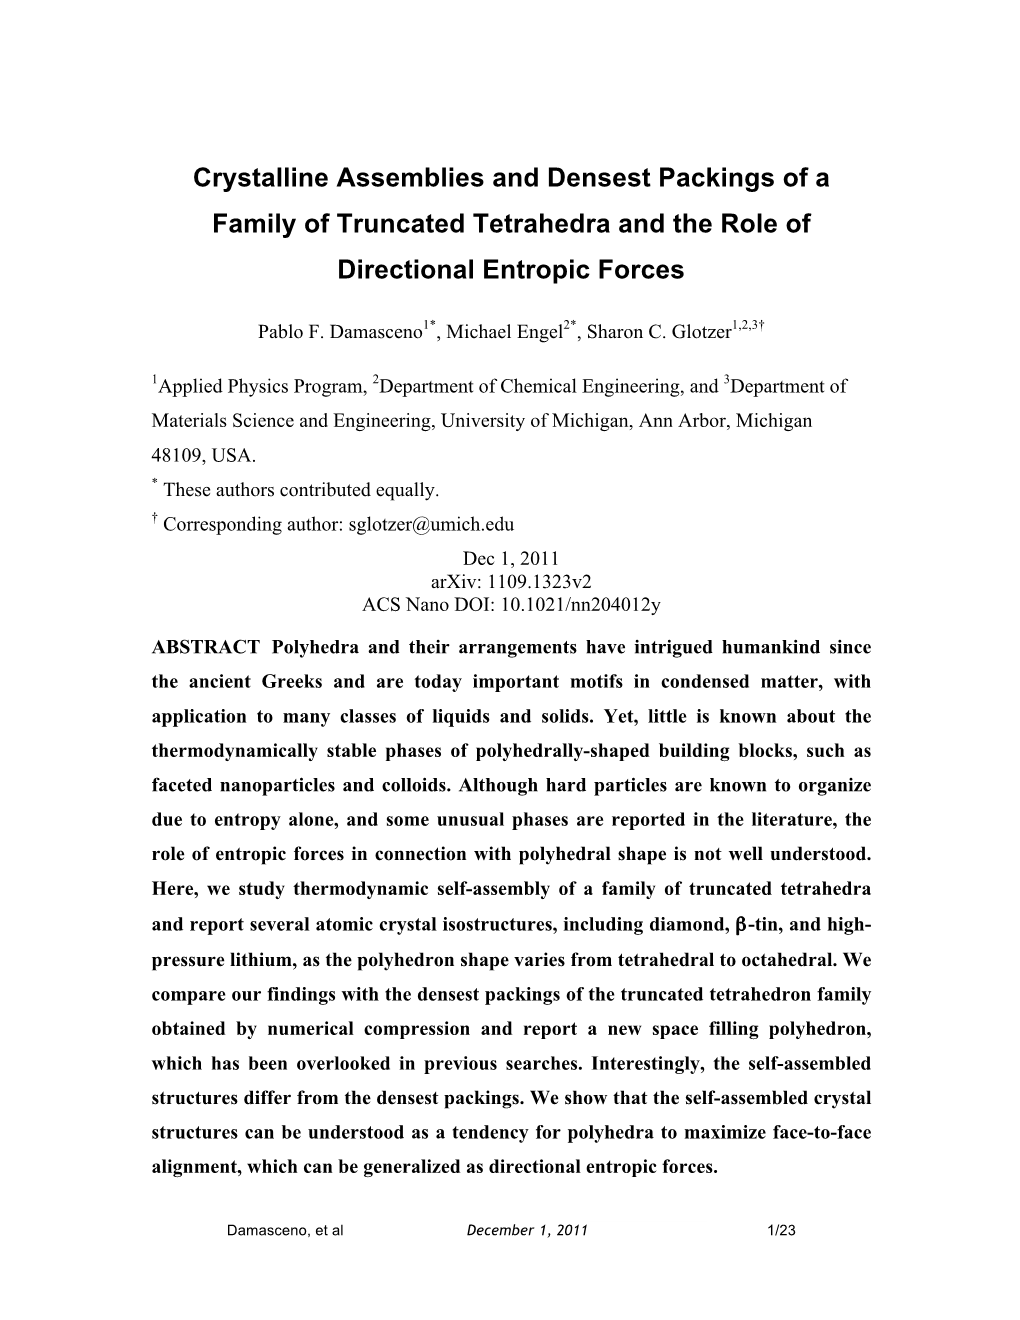 Crystalline Assemblies and Densest Packings of a Family of Truncated Tetrahedra and the Role of Directional Entropic Forces